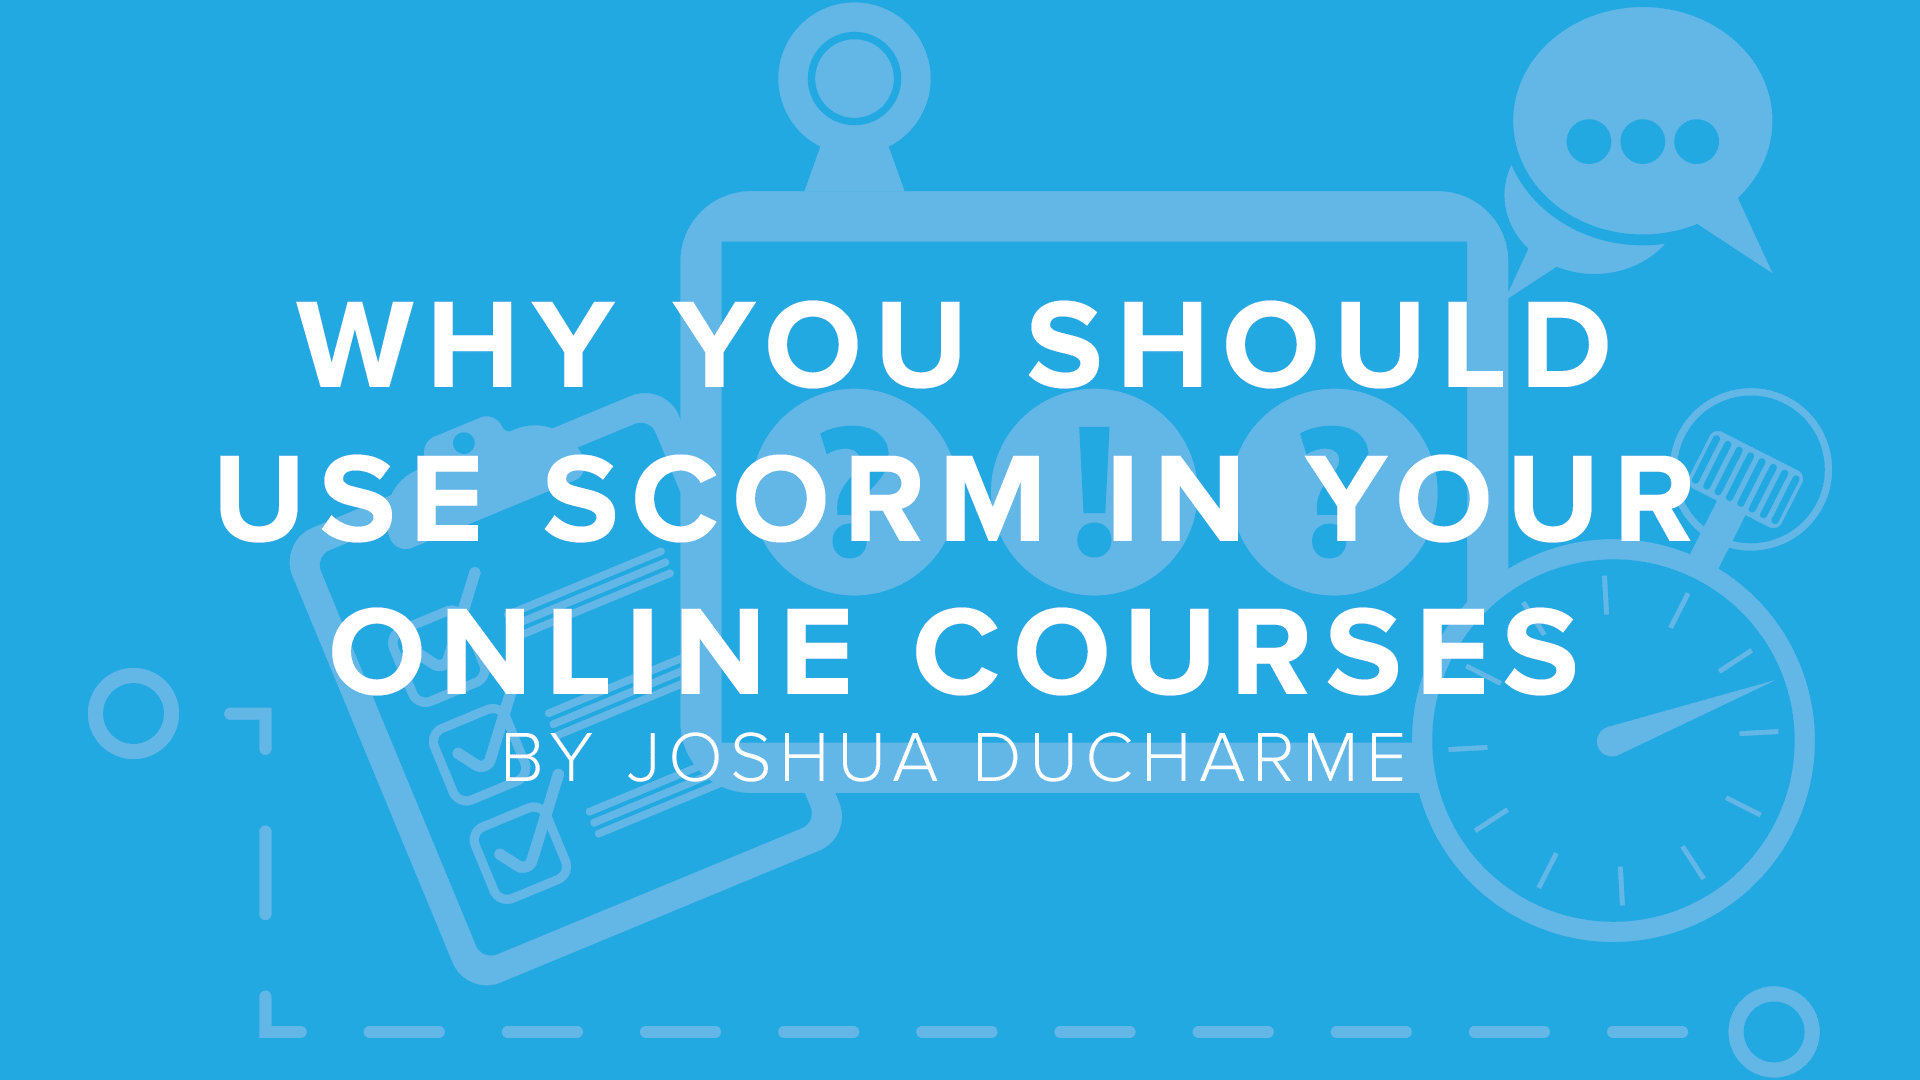 DigitalChalk: Why You Should Use SCORM in Your Online Courses by Joshua Ducharme